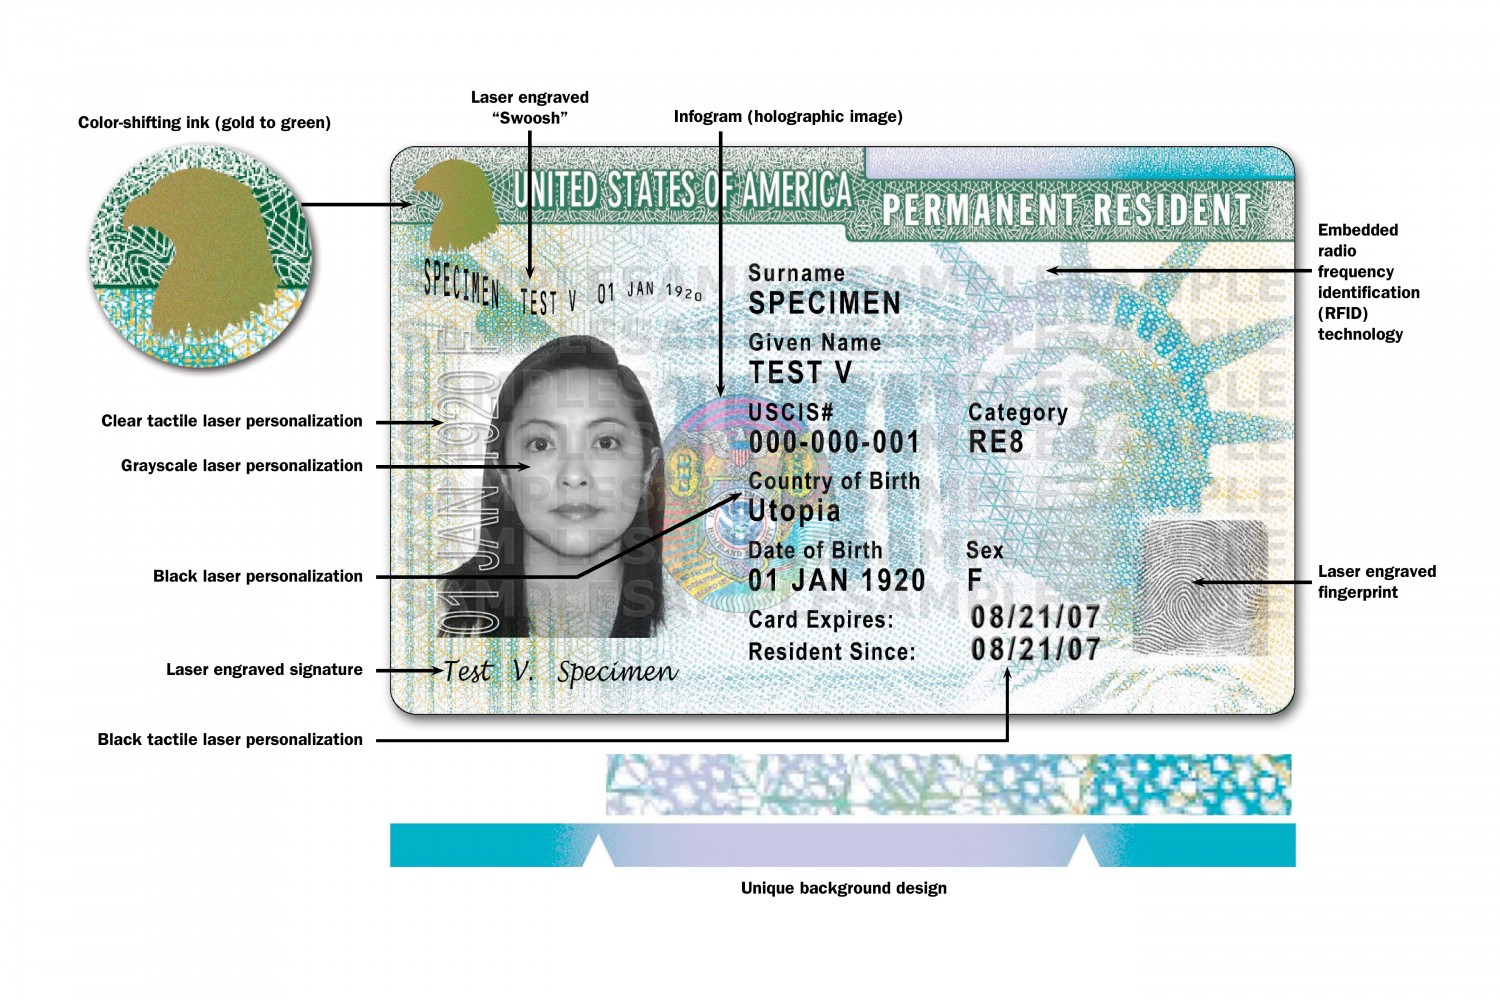 How to Read a Green Card | CitizenPath